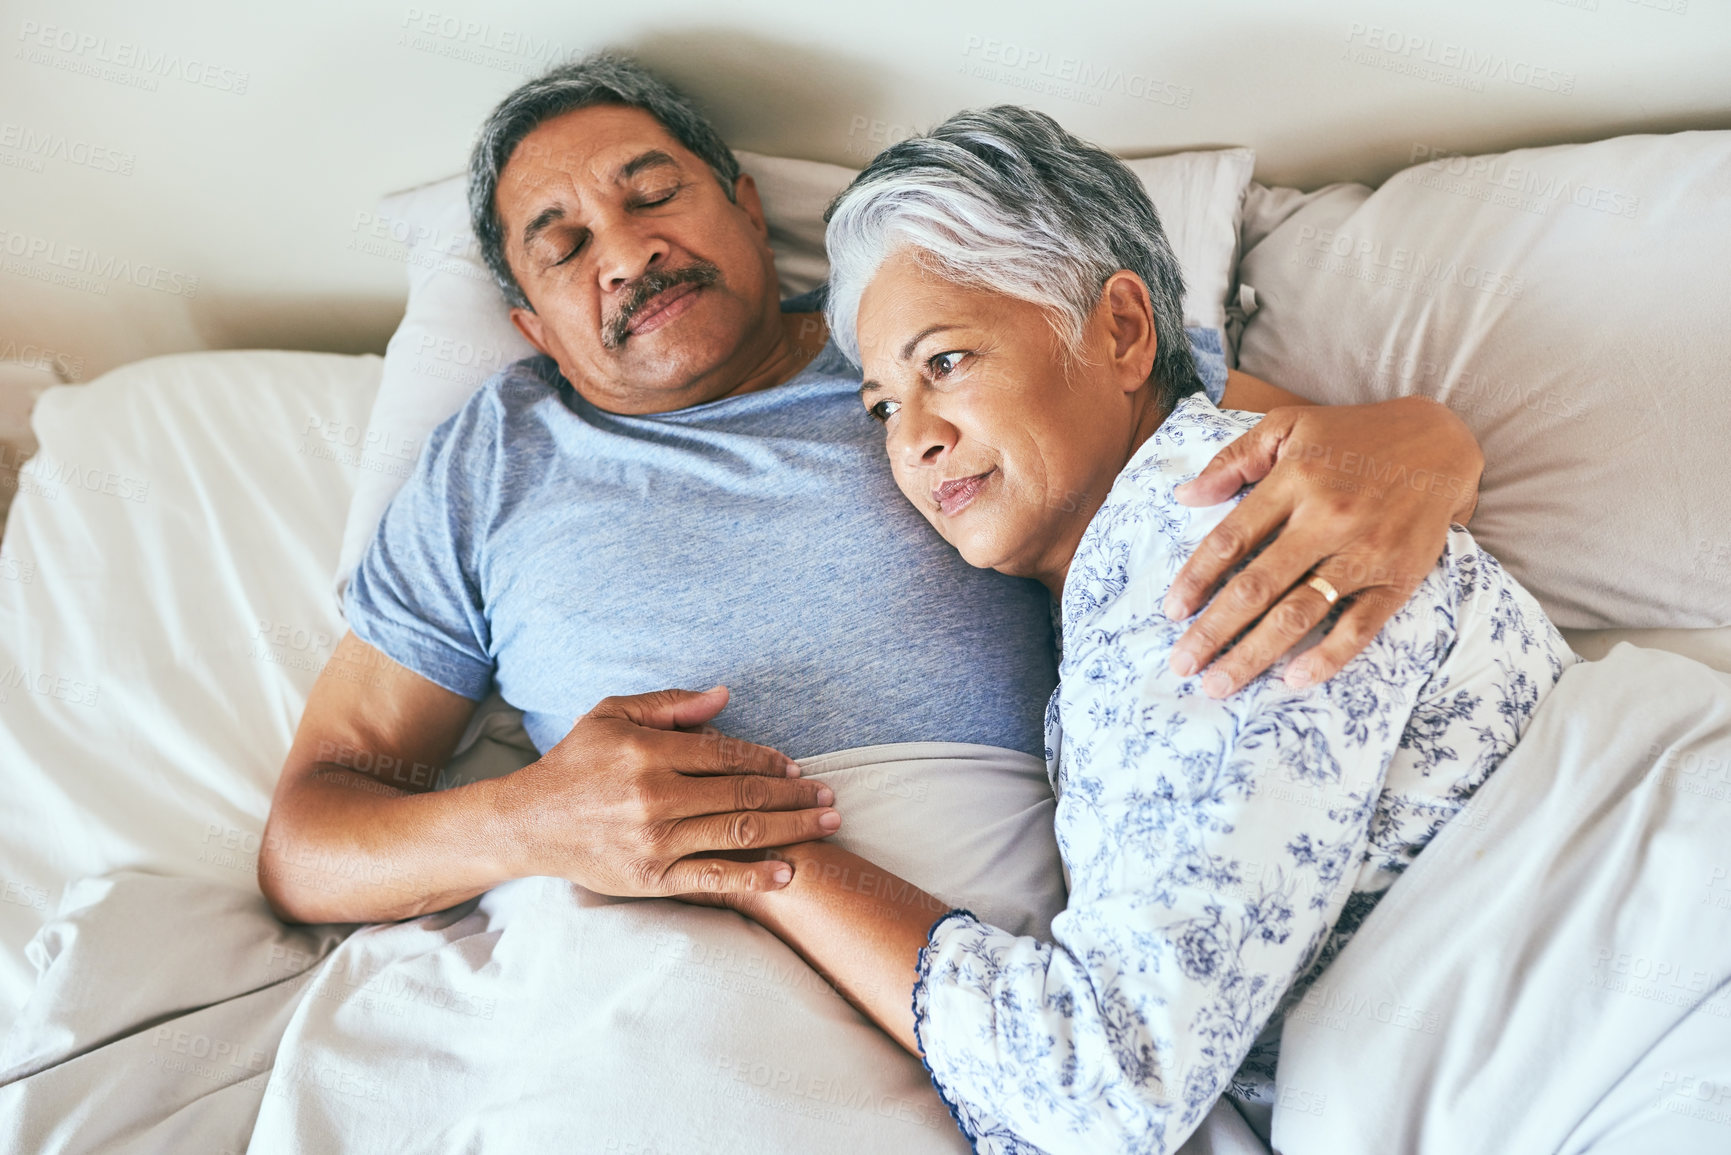 Buy stock photo Shot of a relaxed mature couple lying in bed together at home in during the morning hours